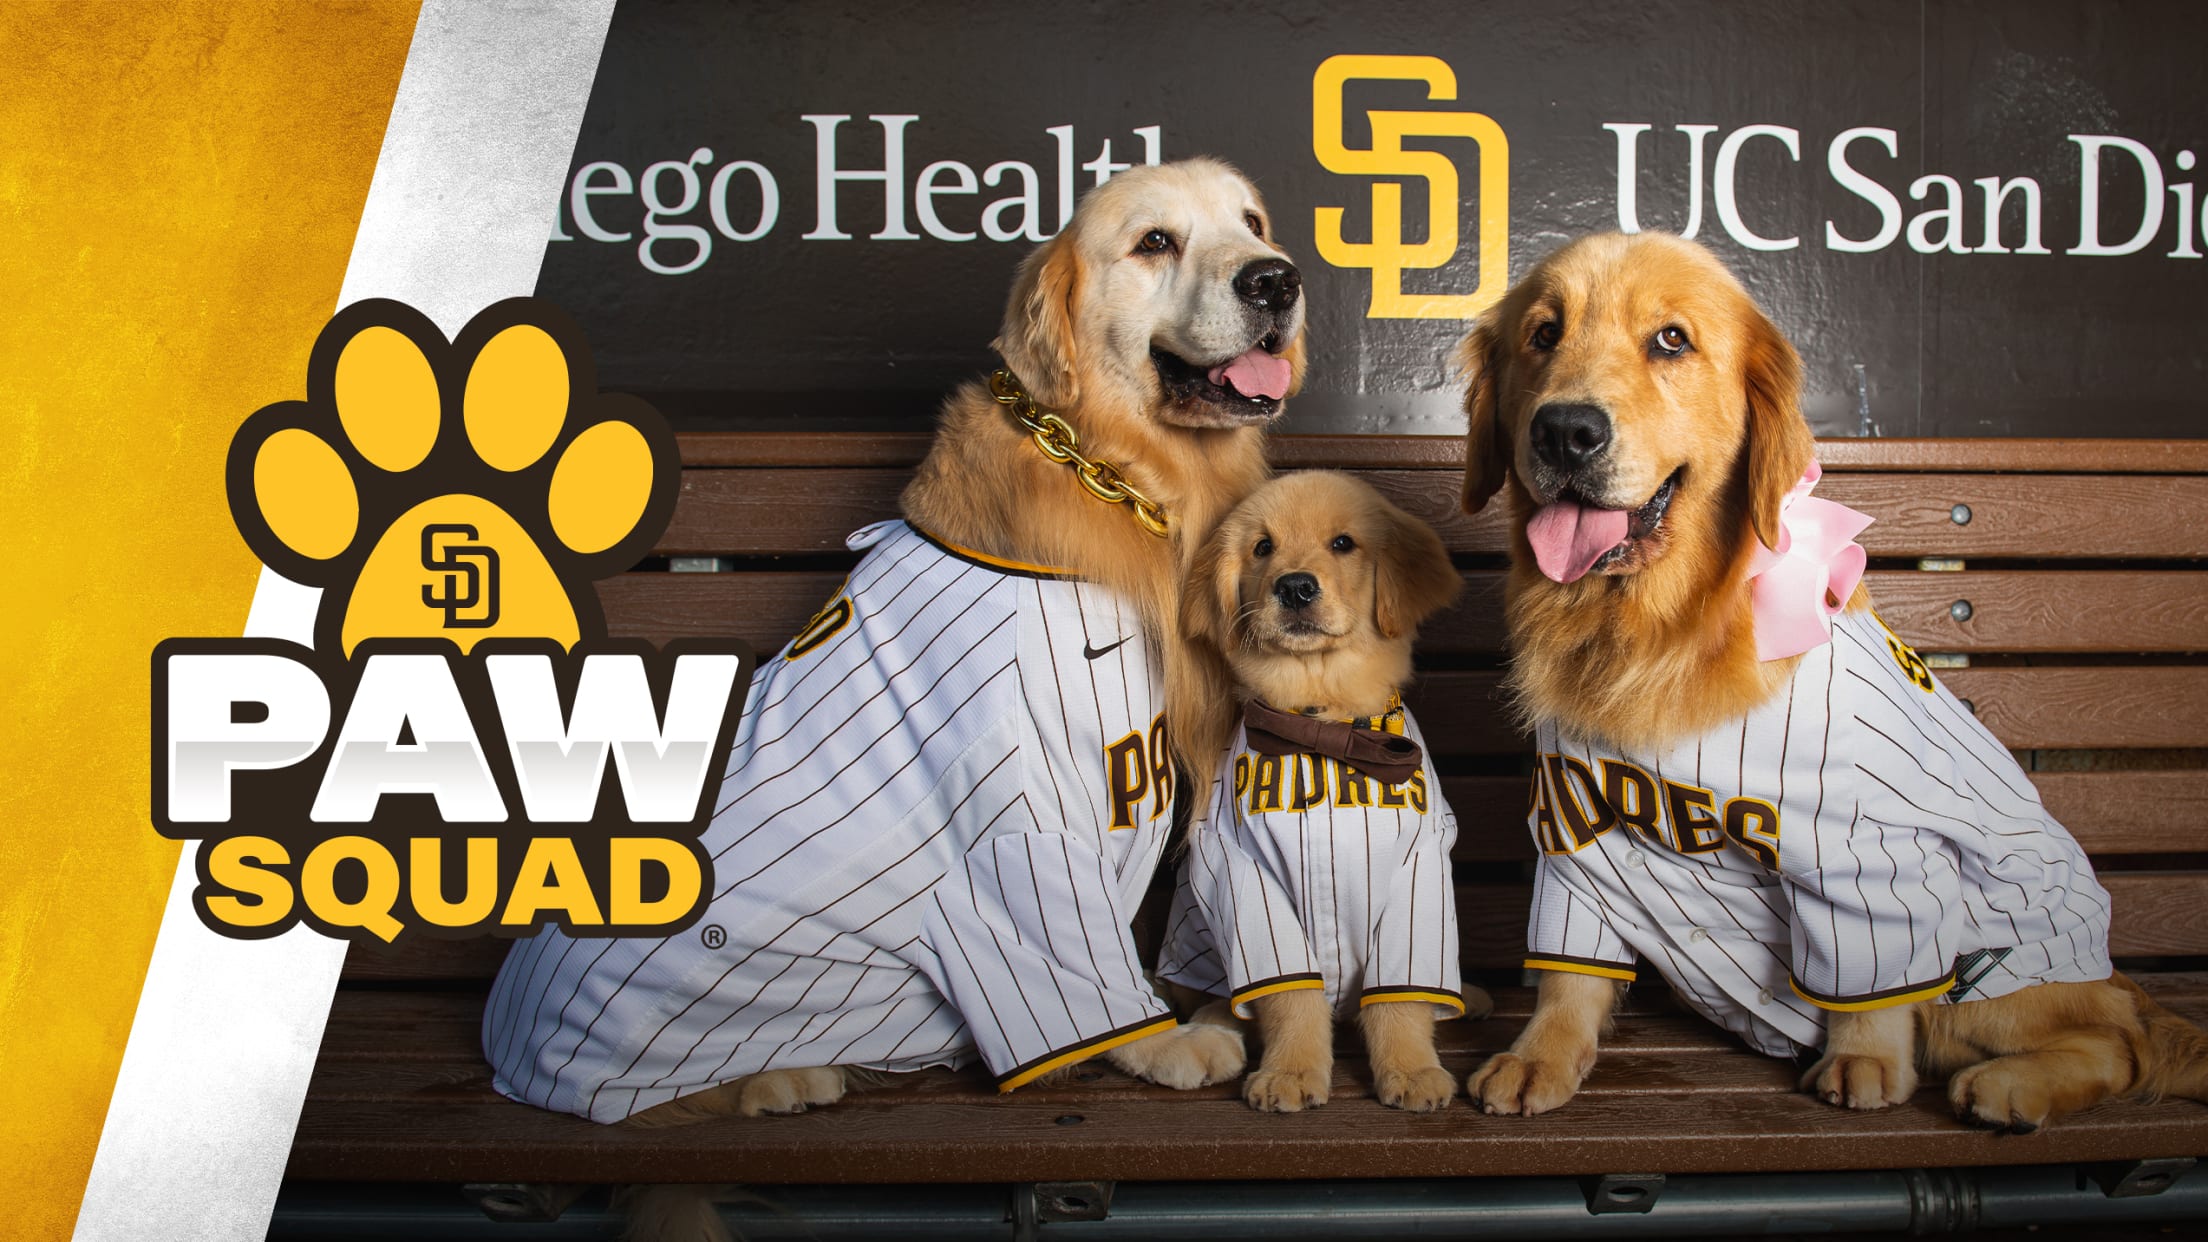 Pets First MLB San Diego Padres Pet Jersey